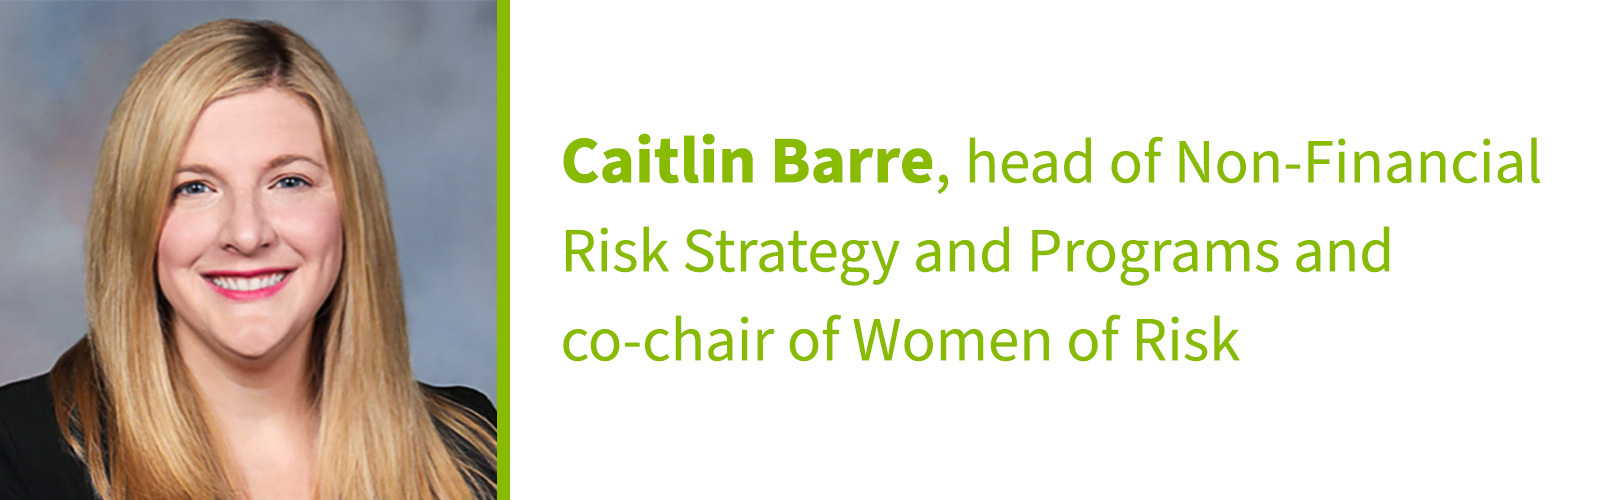 Caitlin Barre, head of Non-Financial Risk Strategy and Programs and co-chair of Women of Risk